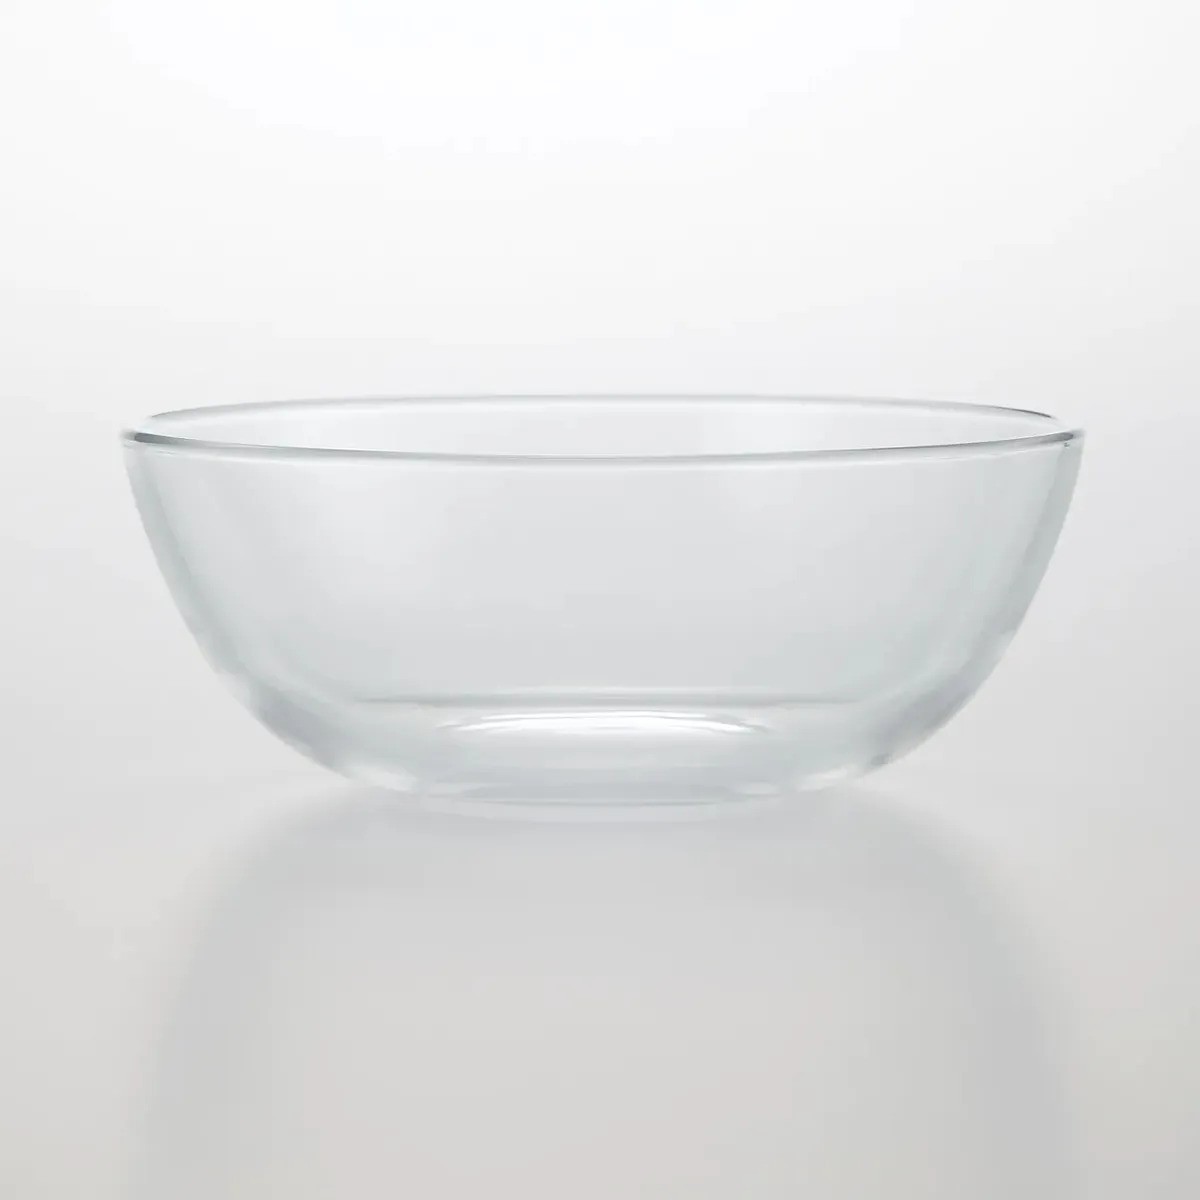 How To Clean A Glass Bowl